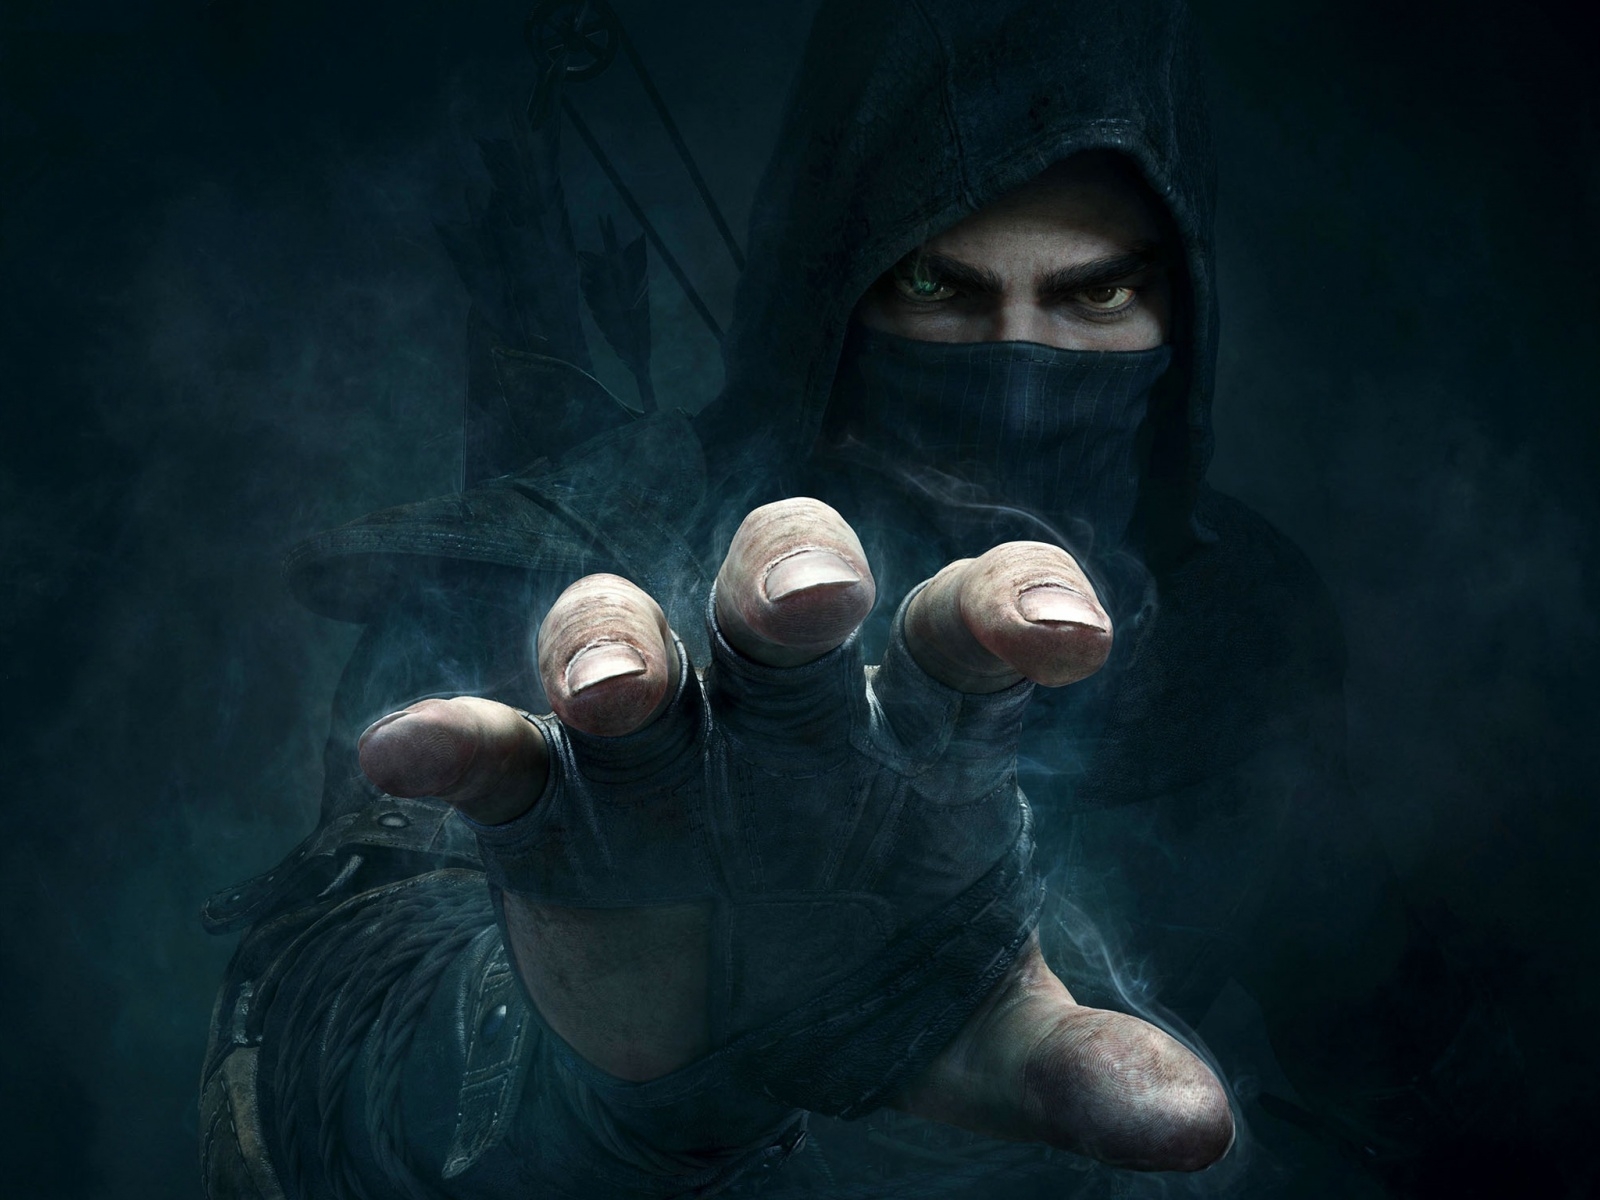 Thief Video Game for 1600 x 1200 resolution